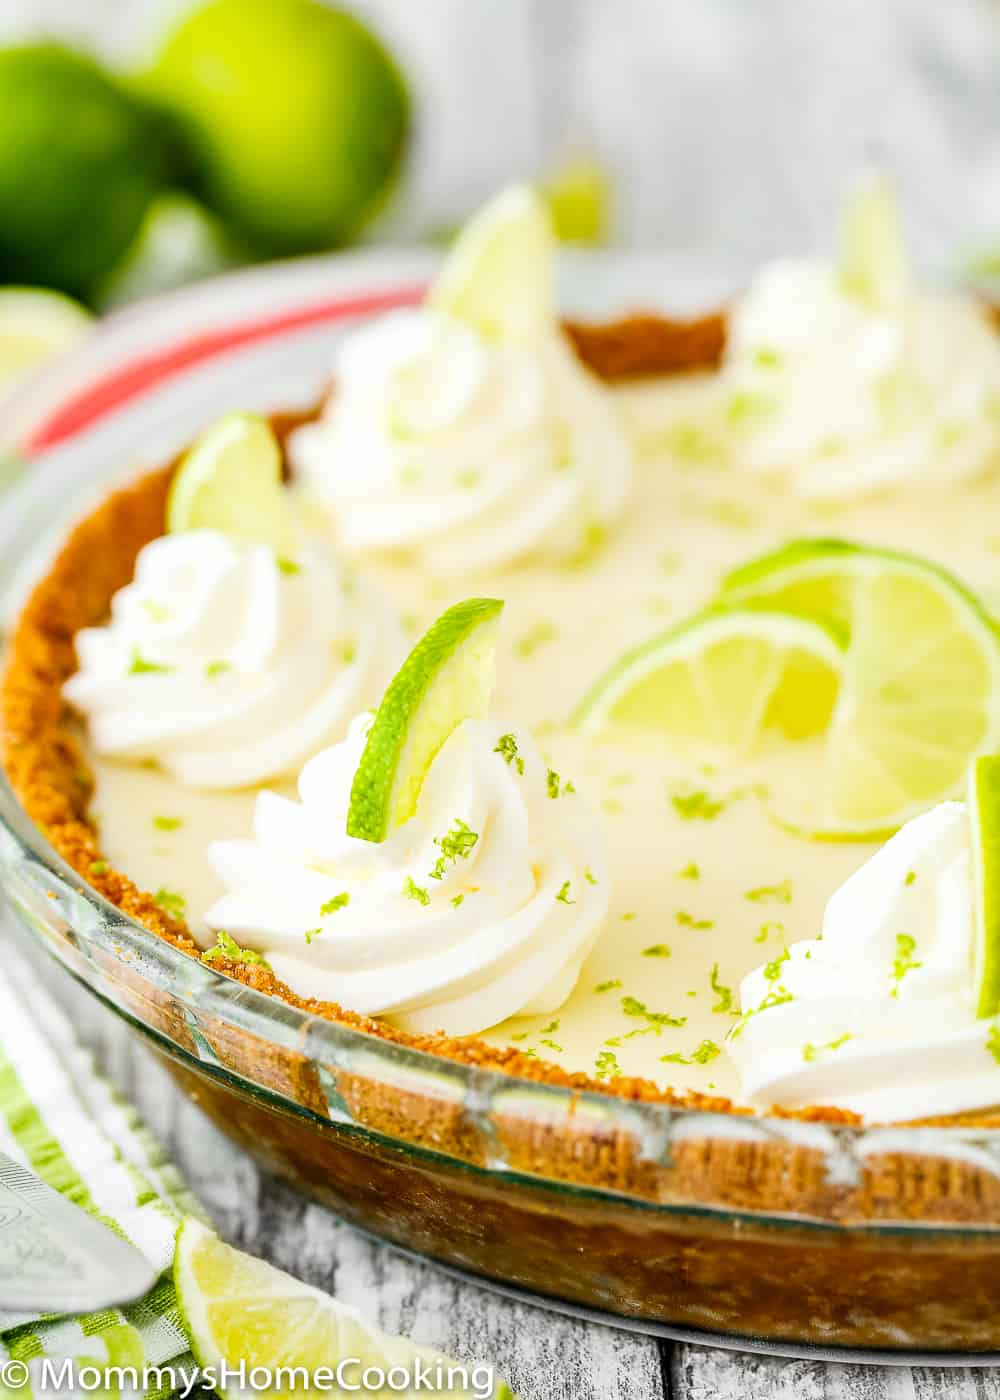 Eggless Key Lime Pie Lovely Easy Eggless Key Lime Pie Mommy S Home Cooking